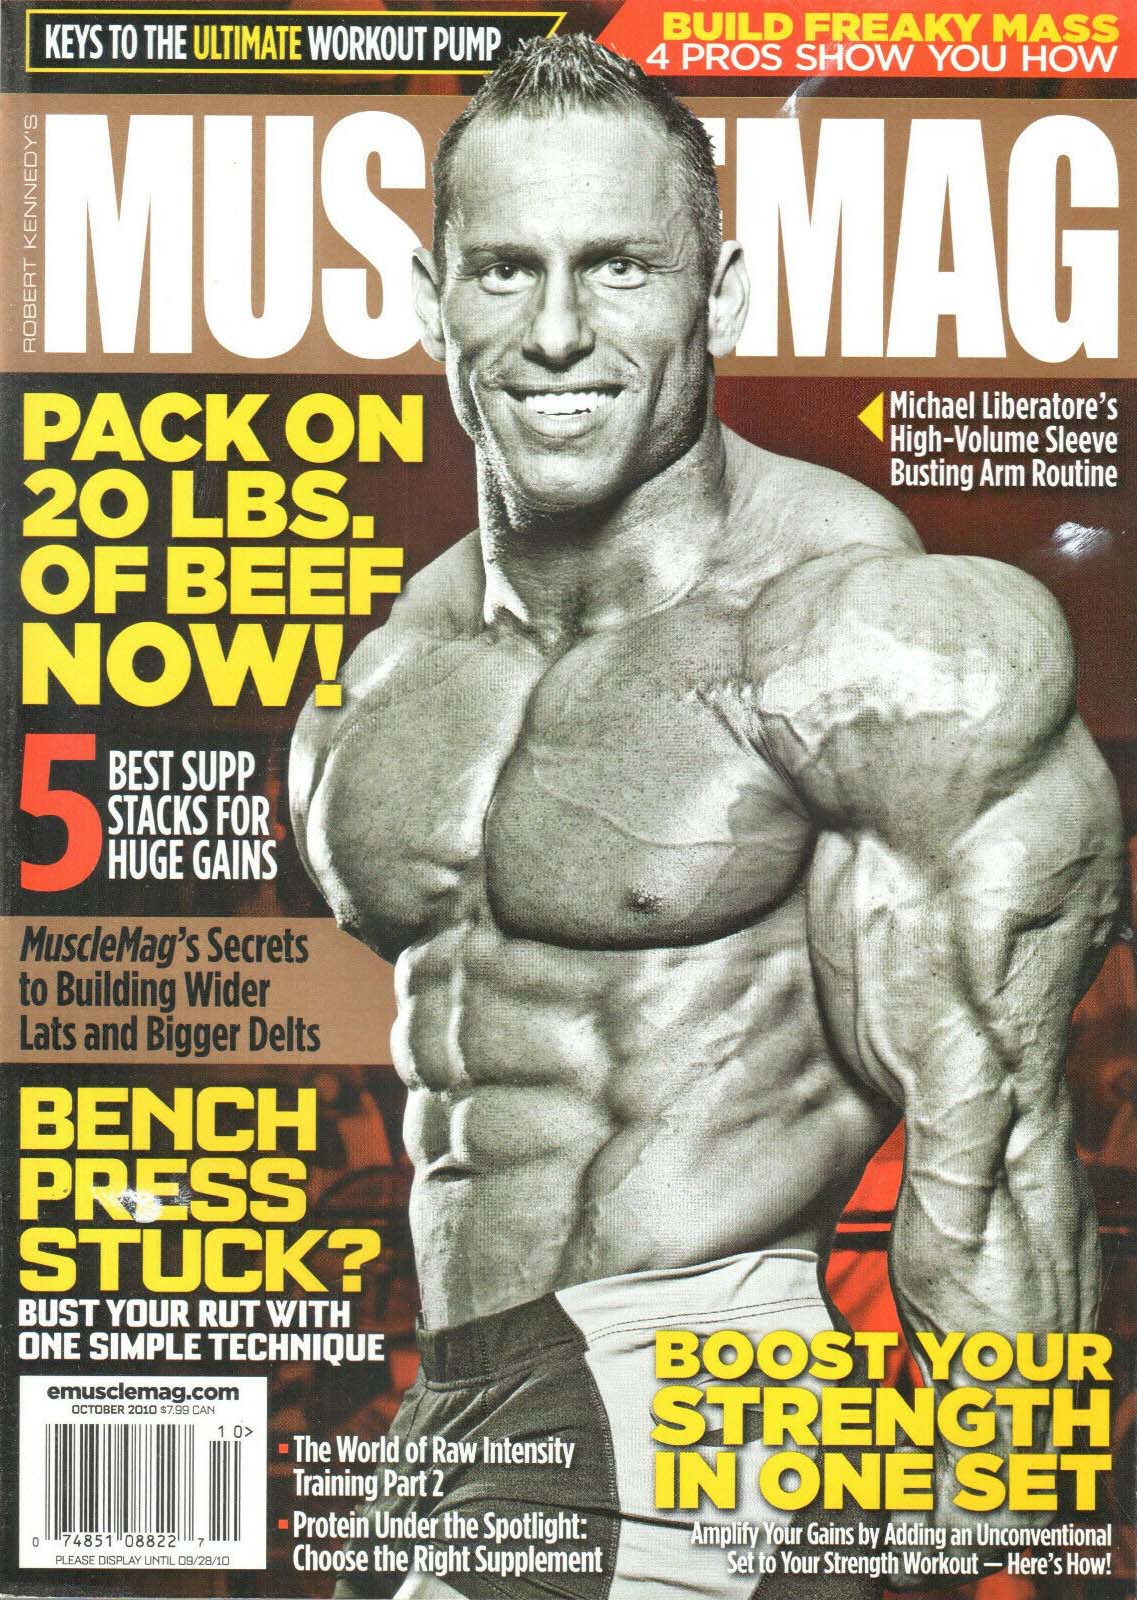 Muscle Mag October 2010 magazine back issue Muscle Mag magizine back copy Muscle Mag October 2010 Bodybuilding and Fitness Magazine Back Issue Published by Canadian Robert Kennedy and Founded in 1974. Keys To The Ultimate Workout Pump.